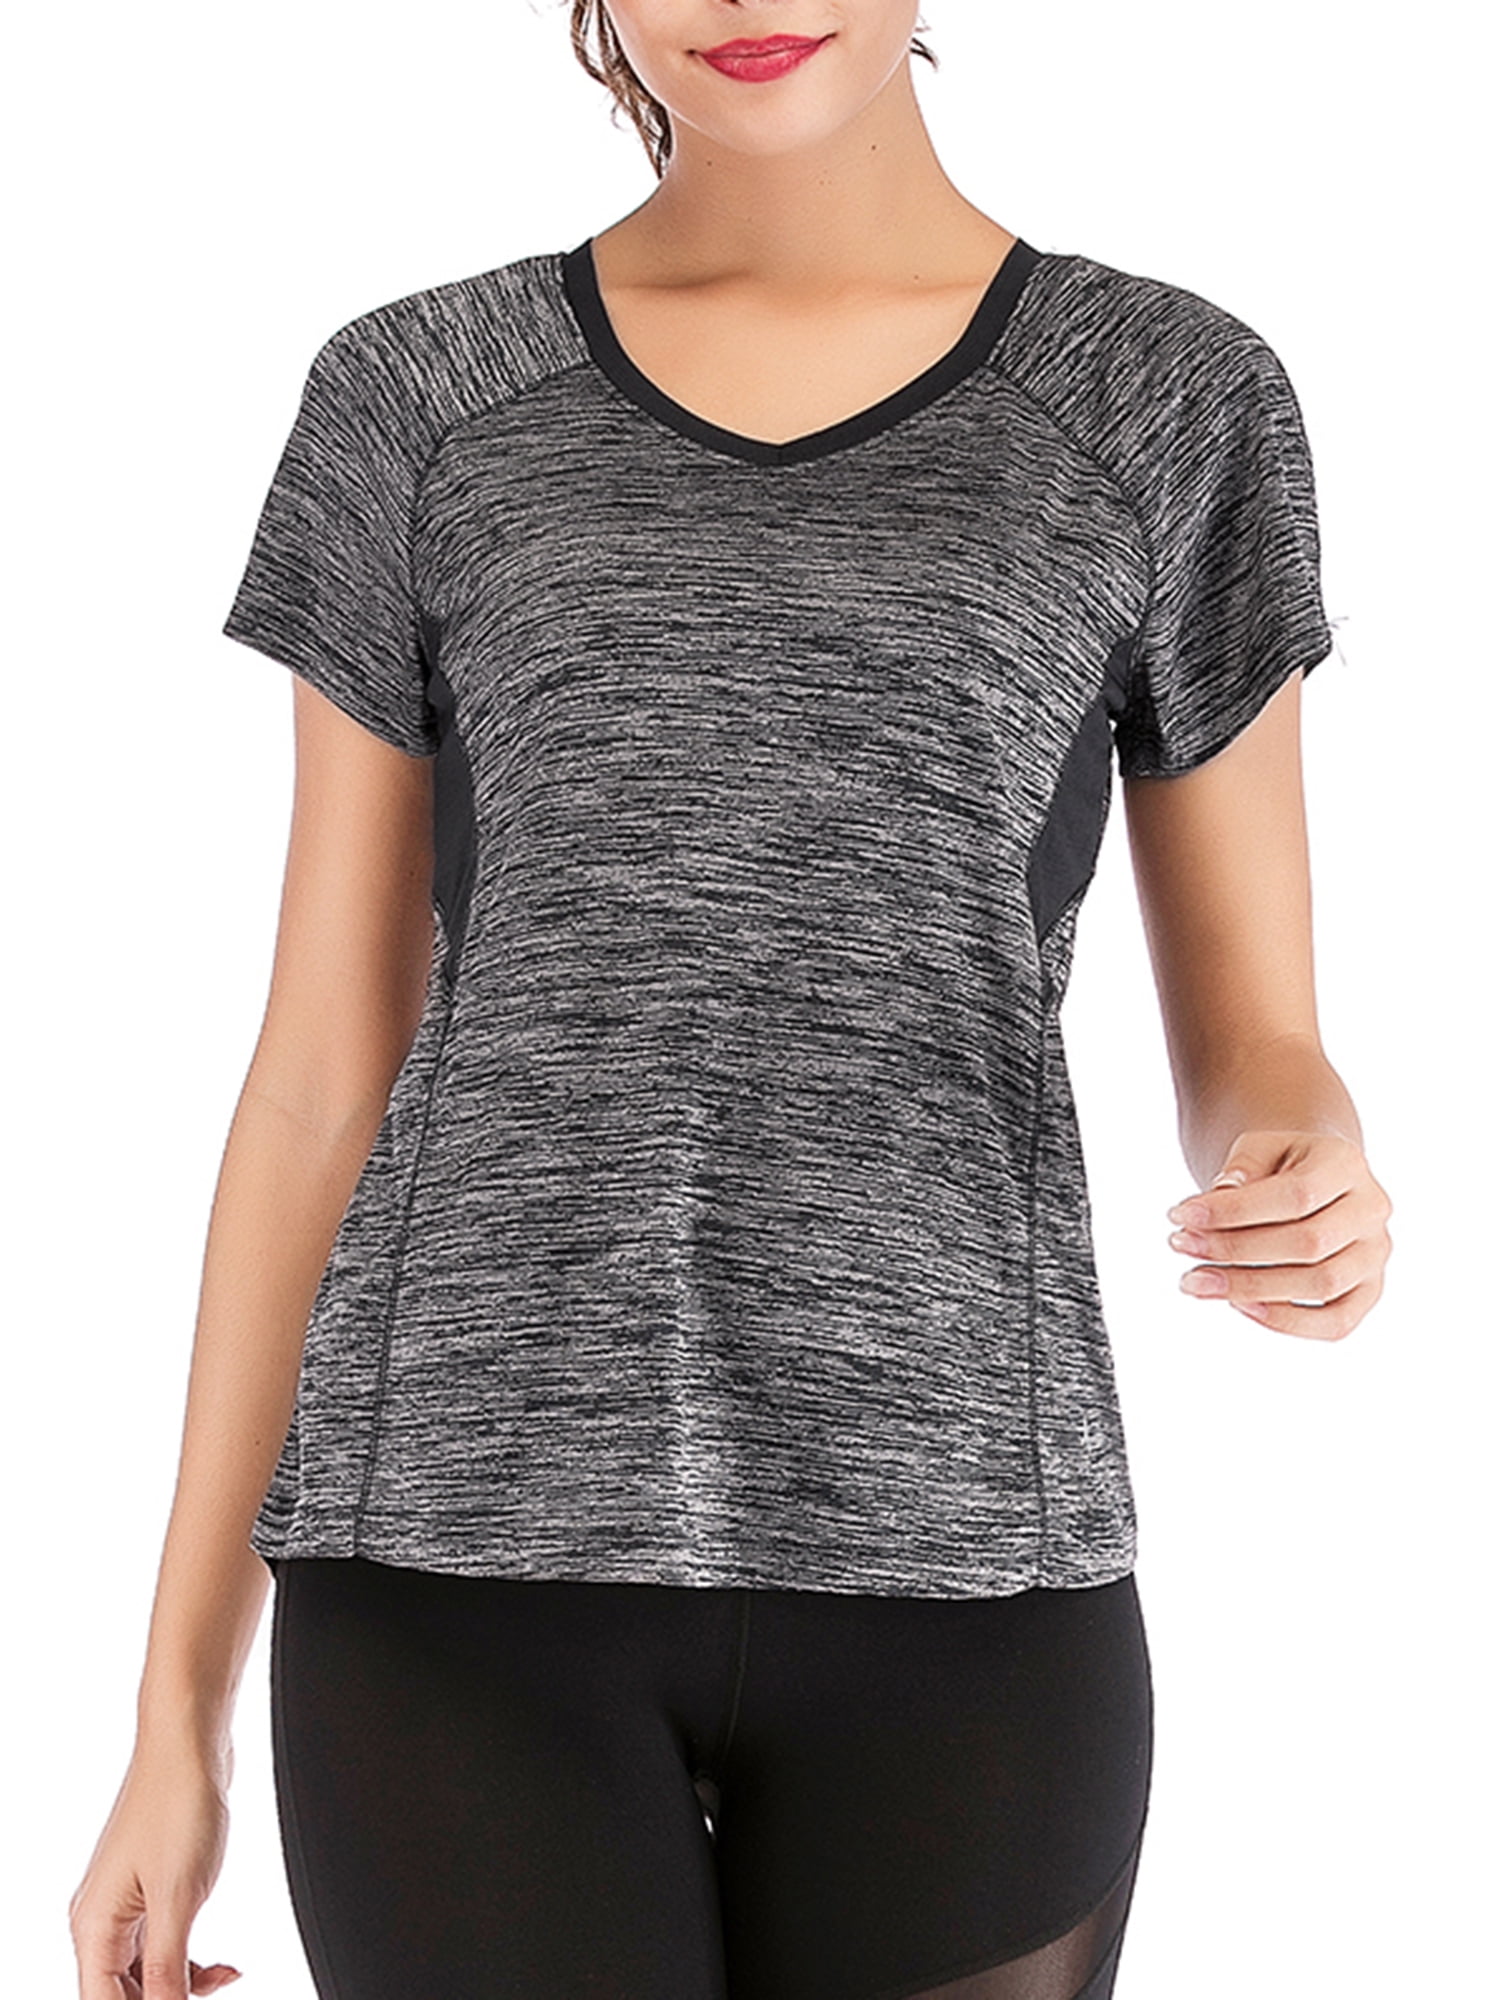 New Womens Breathable T Shirt Ladies Cool Dry Running Gym Top Wicking Sports Tee